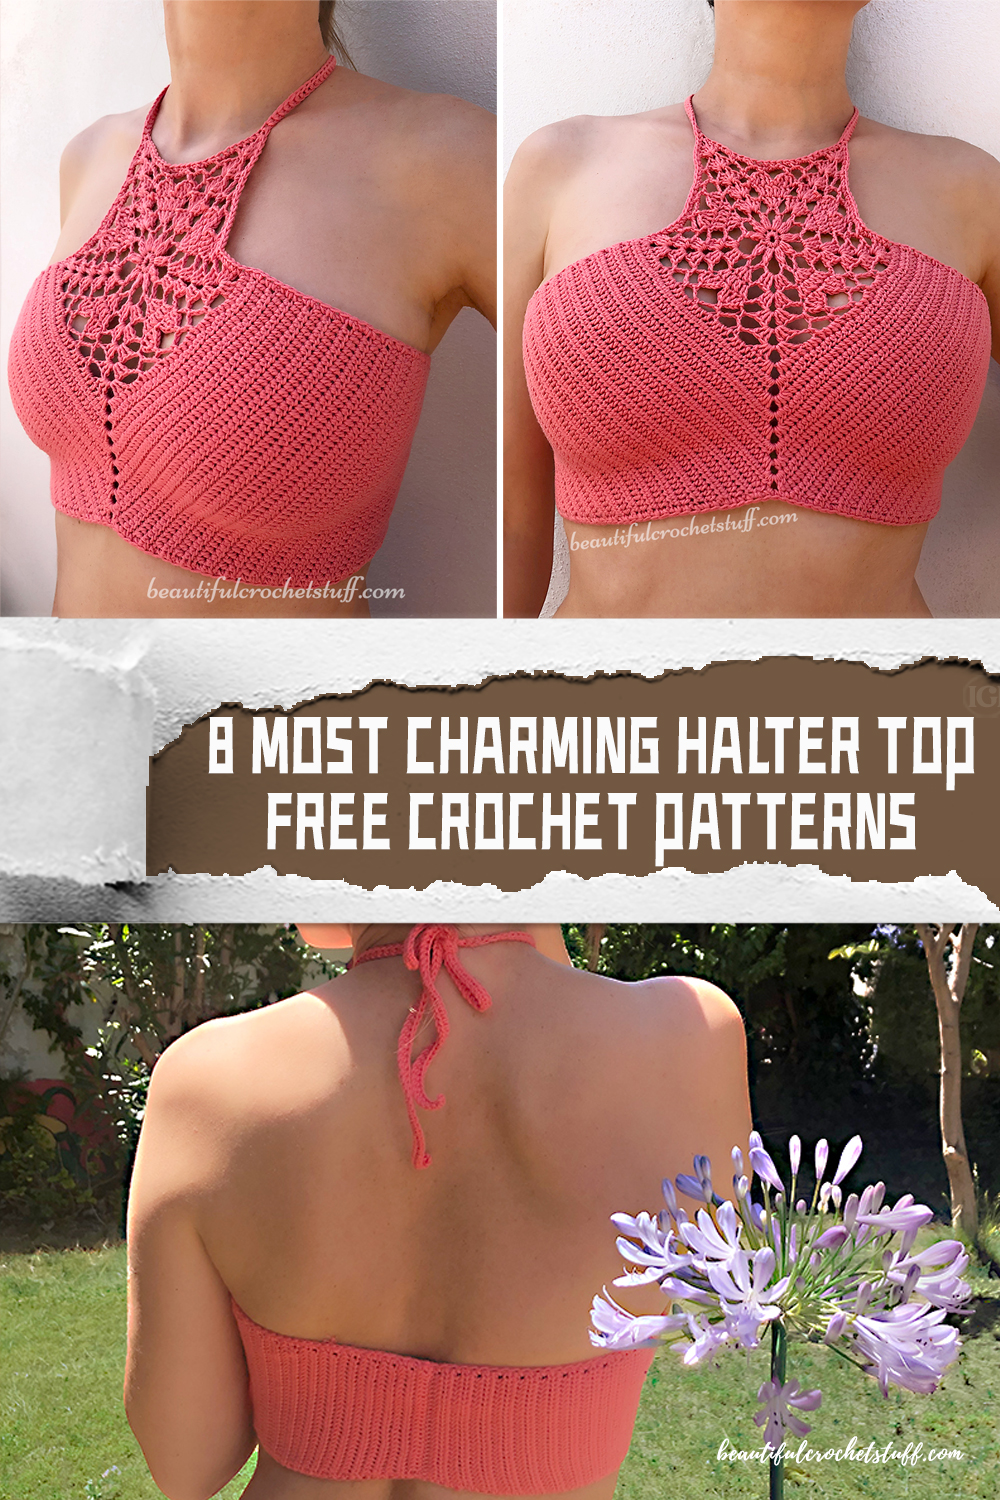 8 Most Charming Halter Top FREE Crochet Patterns 